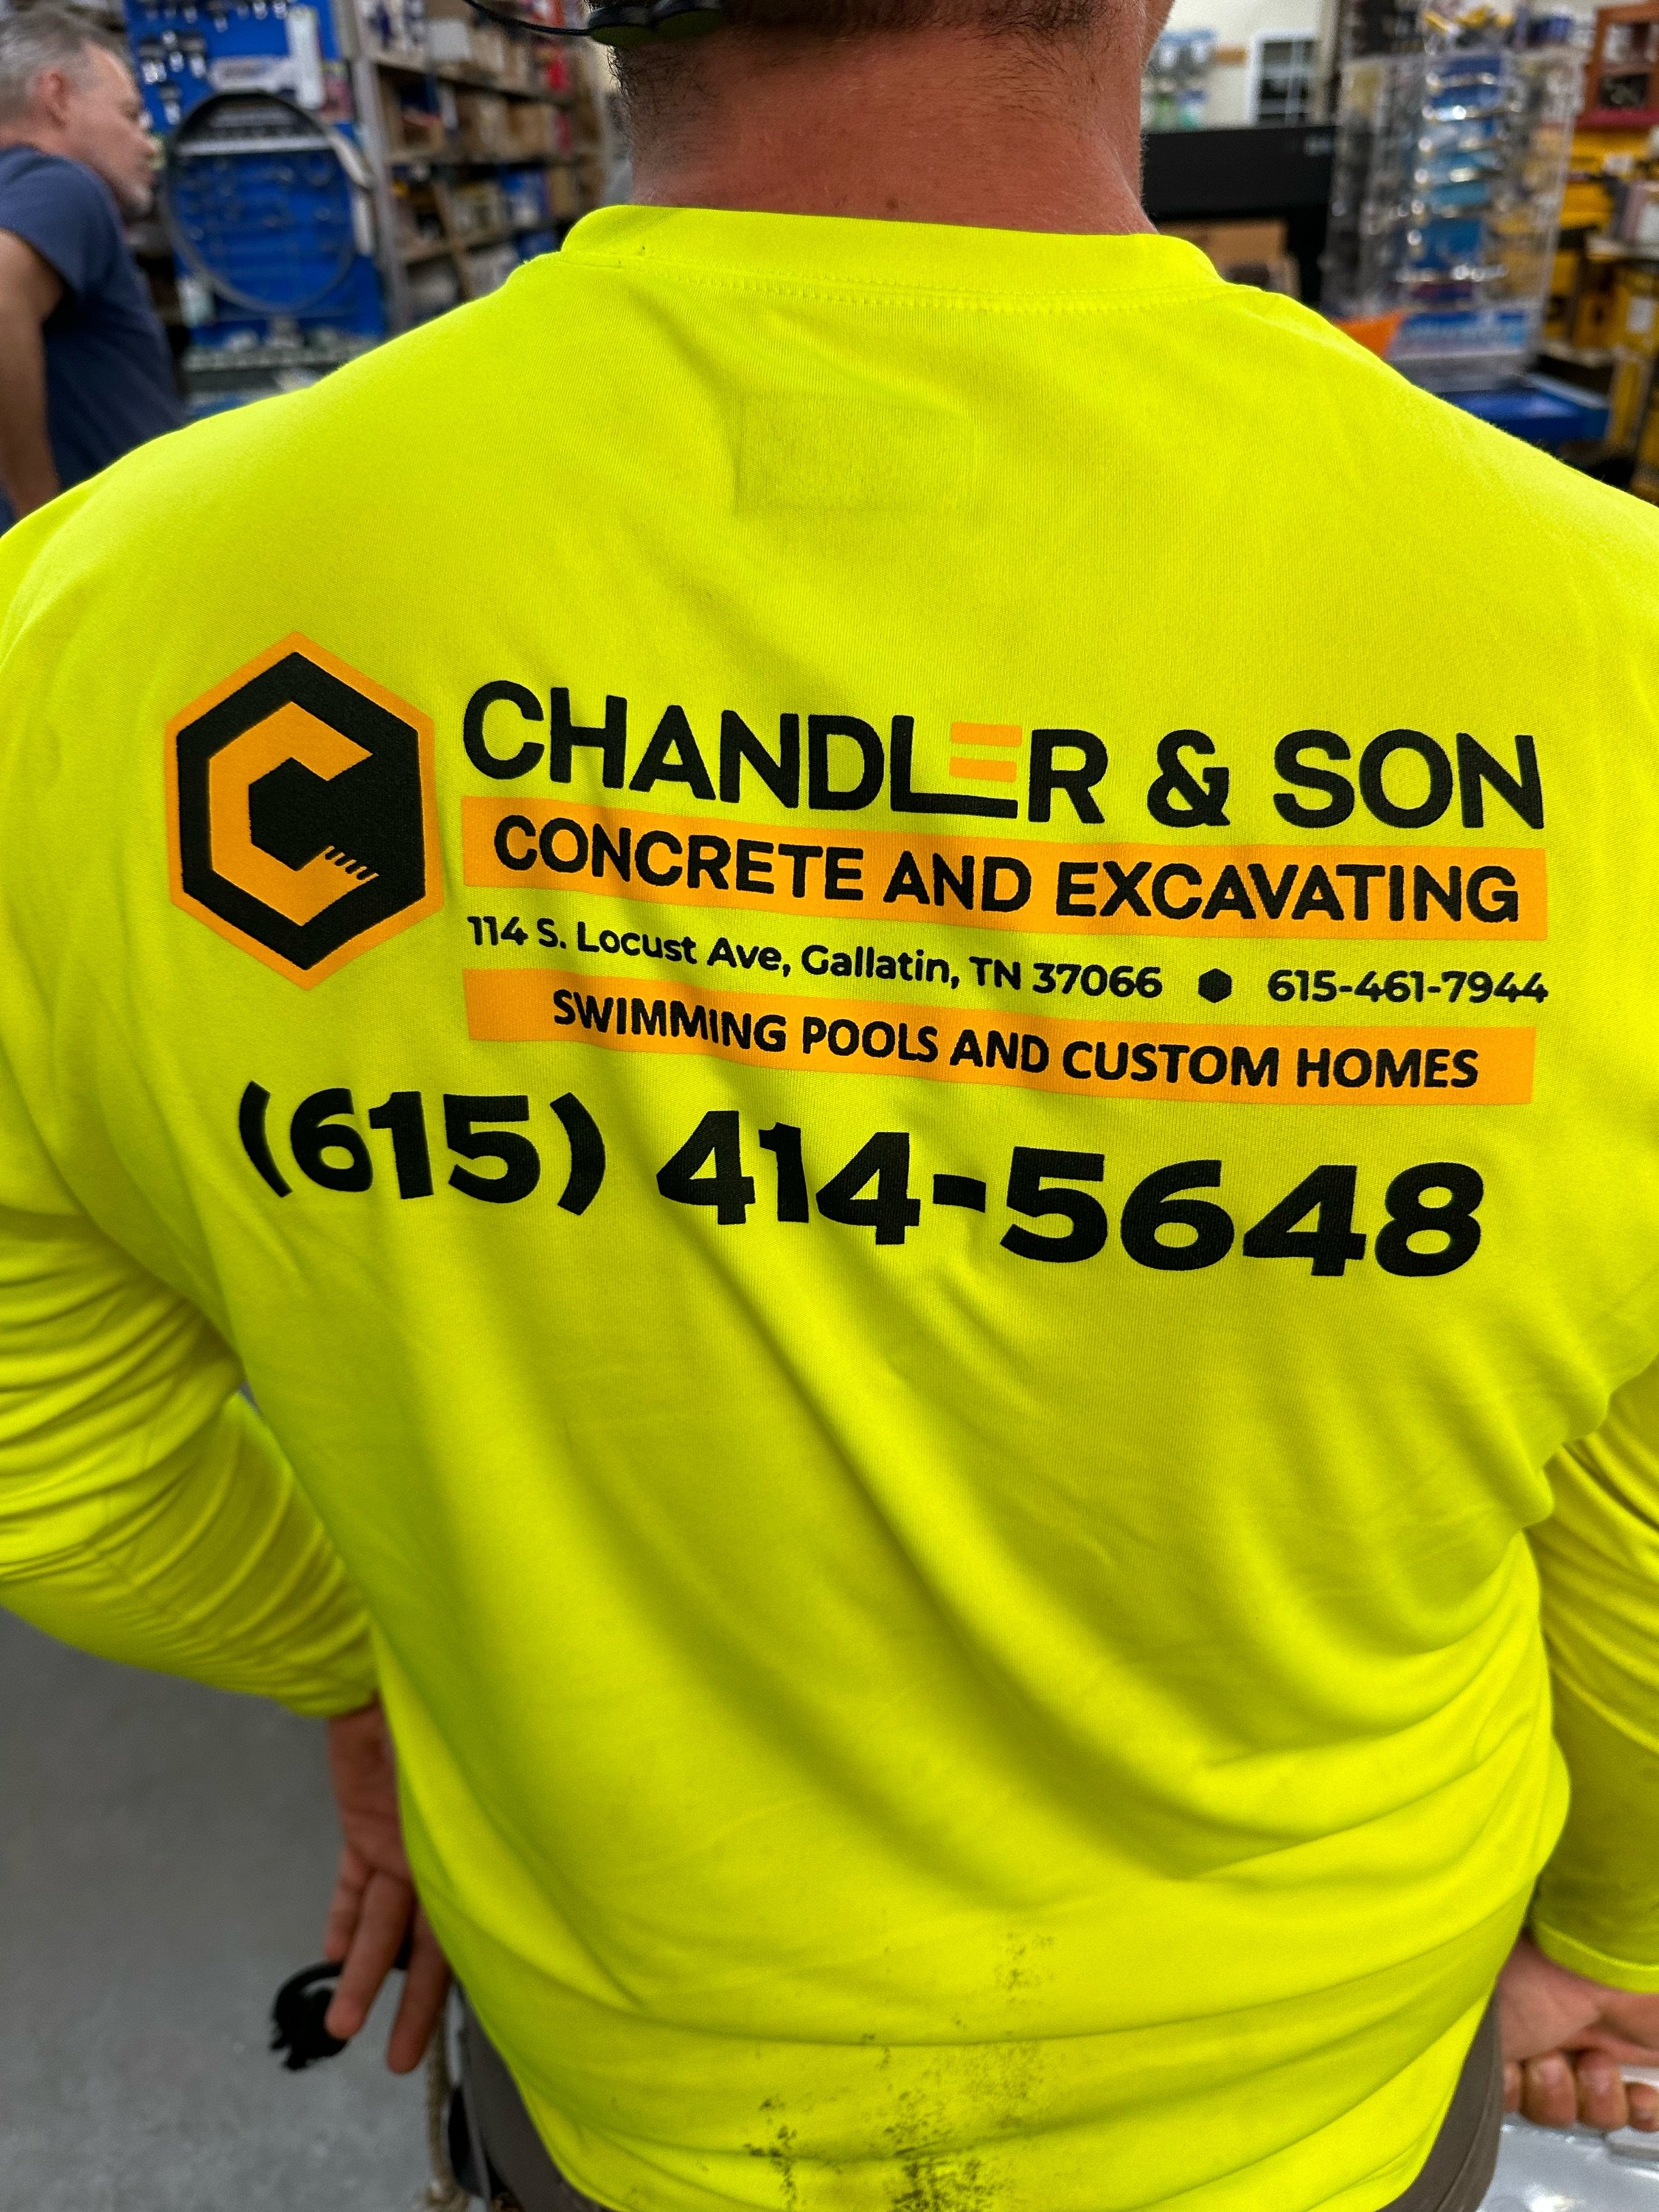 Chandler & Son Concrete and Excavating Logo